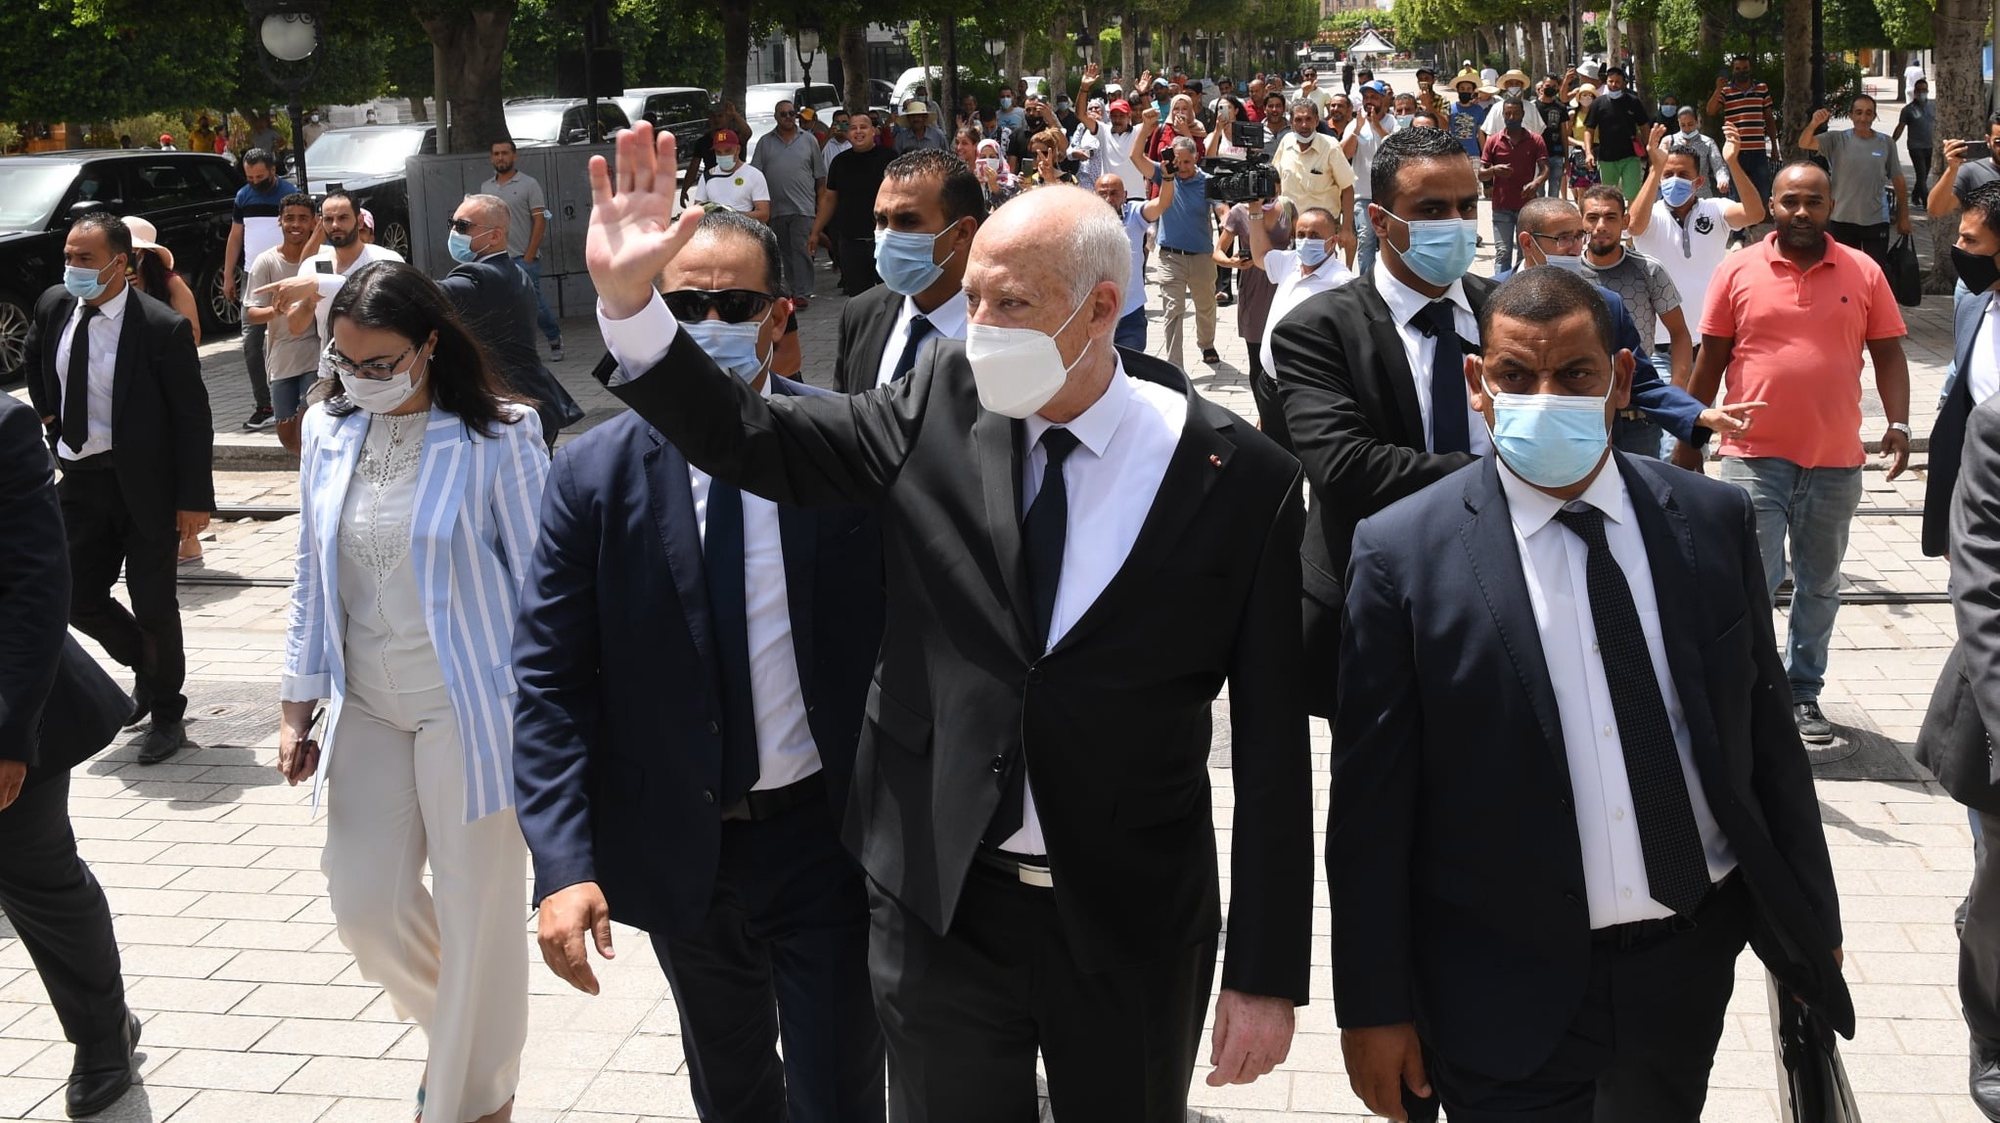 epa09386130 A handout photo made available by the Tunisian Presidency shows Tunisian President Kais Saied (C) gesturing among supports as he walks protected by security guards in Habib Bourguiba Avenue, Tunis, Tunisia, 01 August 2021. Two Members of the Parliament were reportedly arrested on 01 August brining to three the number of MPs detained since Saied sacked prime minister Mechichi and suspended the parliament on 25 July. Saied said he acted within the constitution as US Secretary of State Antony Blinken called for the return &#039;to the democratic path&#039; in the country.  EPA/PRESIDENCY OF TUNISIA HANDOUT  HANDOUT EDITORIAL USE ONLY/NO SALES